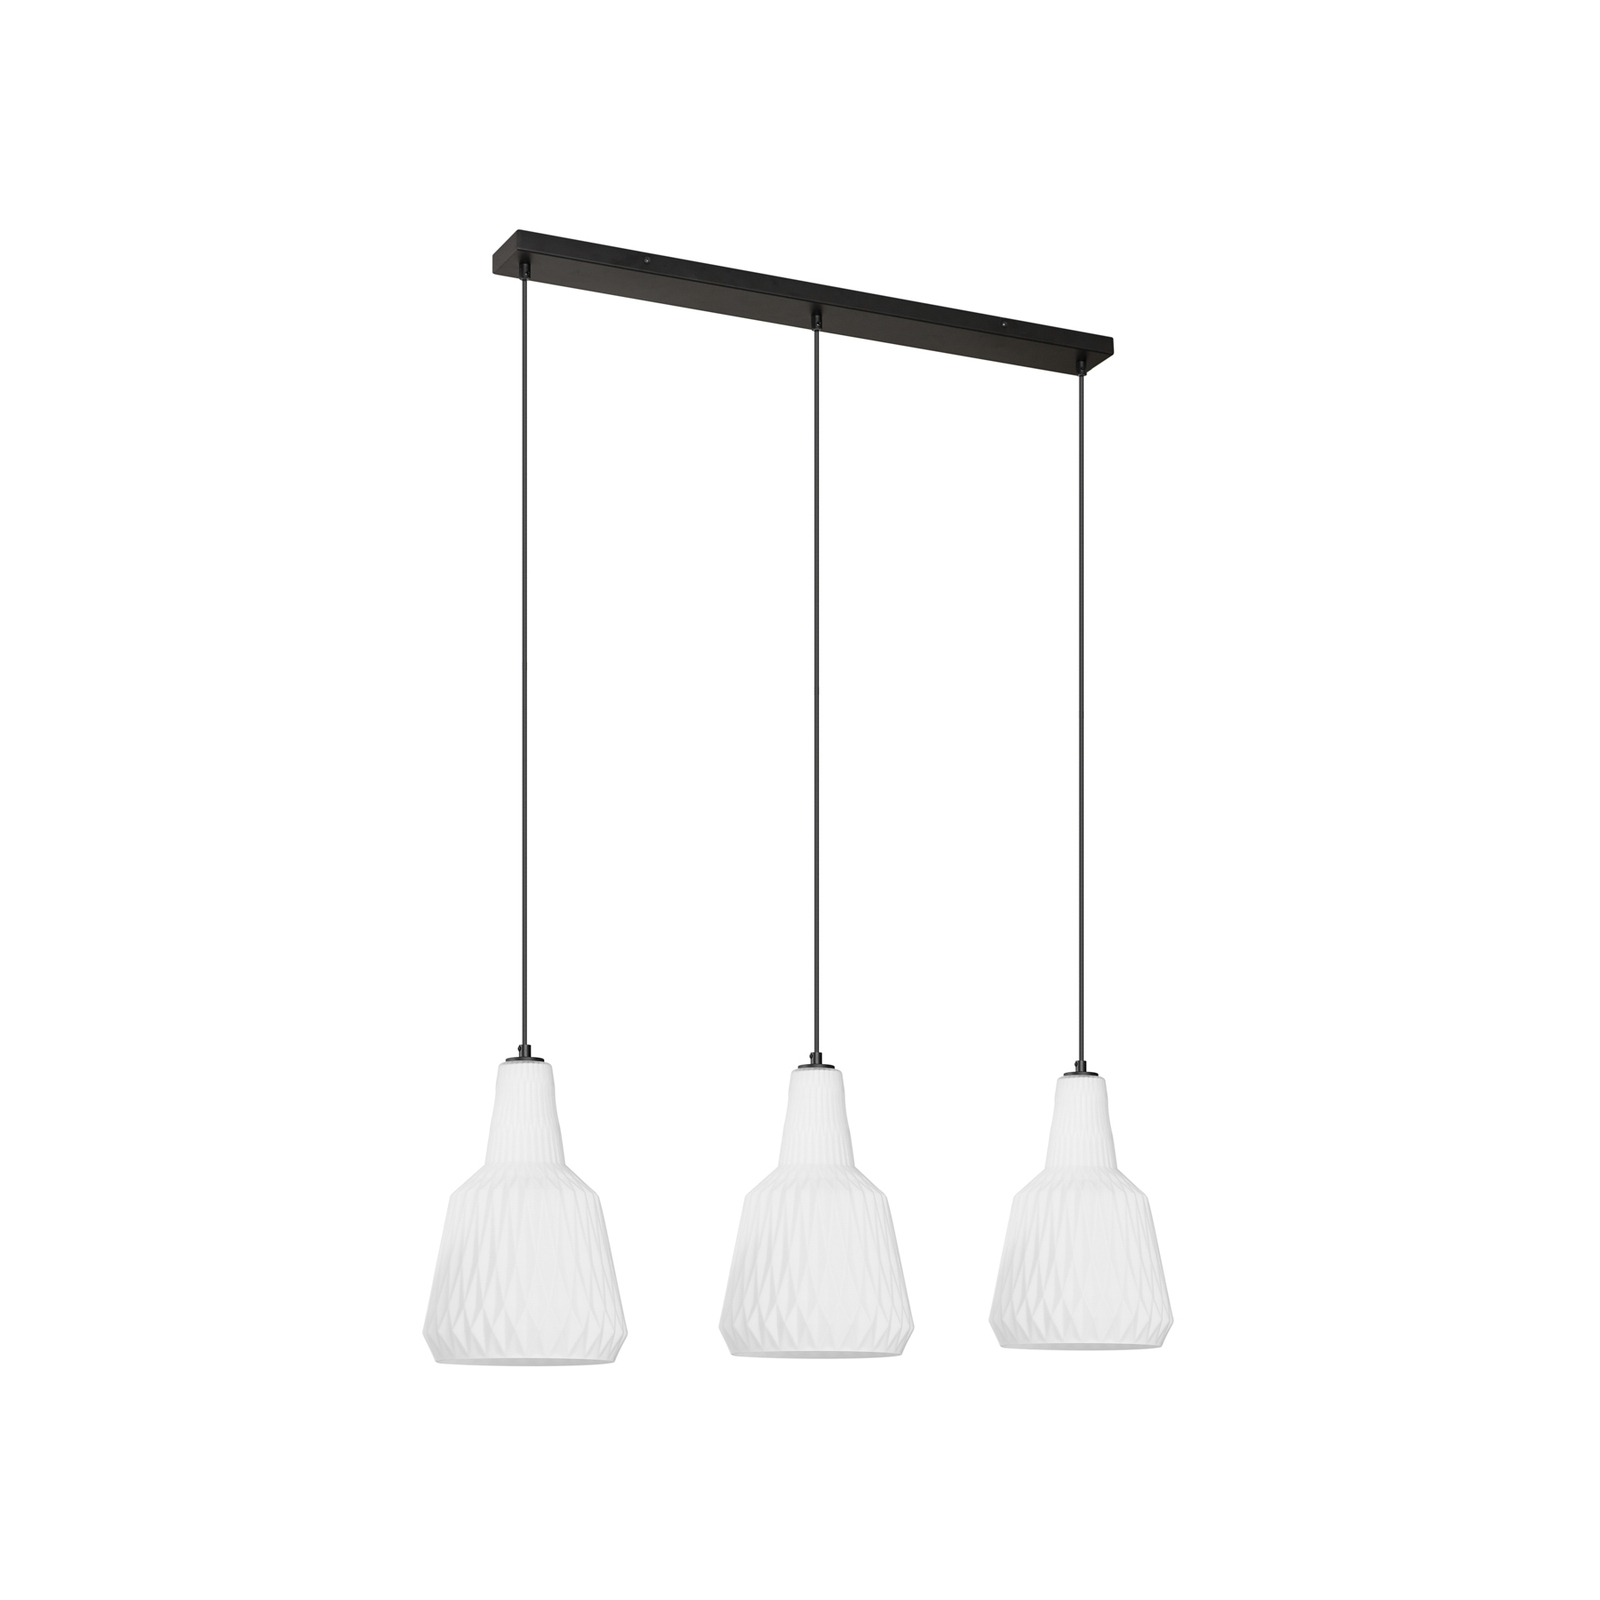 Lindby Belarion hanglamp, opaal, 3-lamps, glas